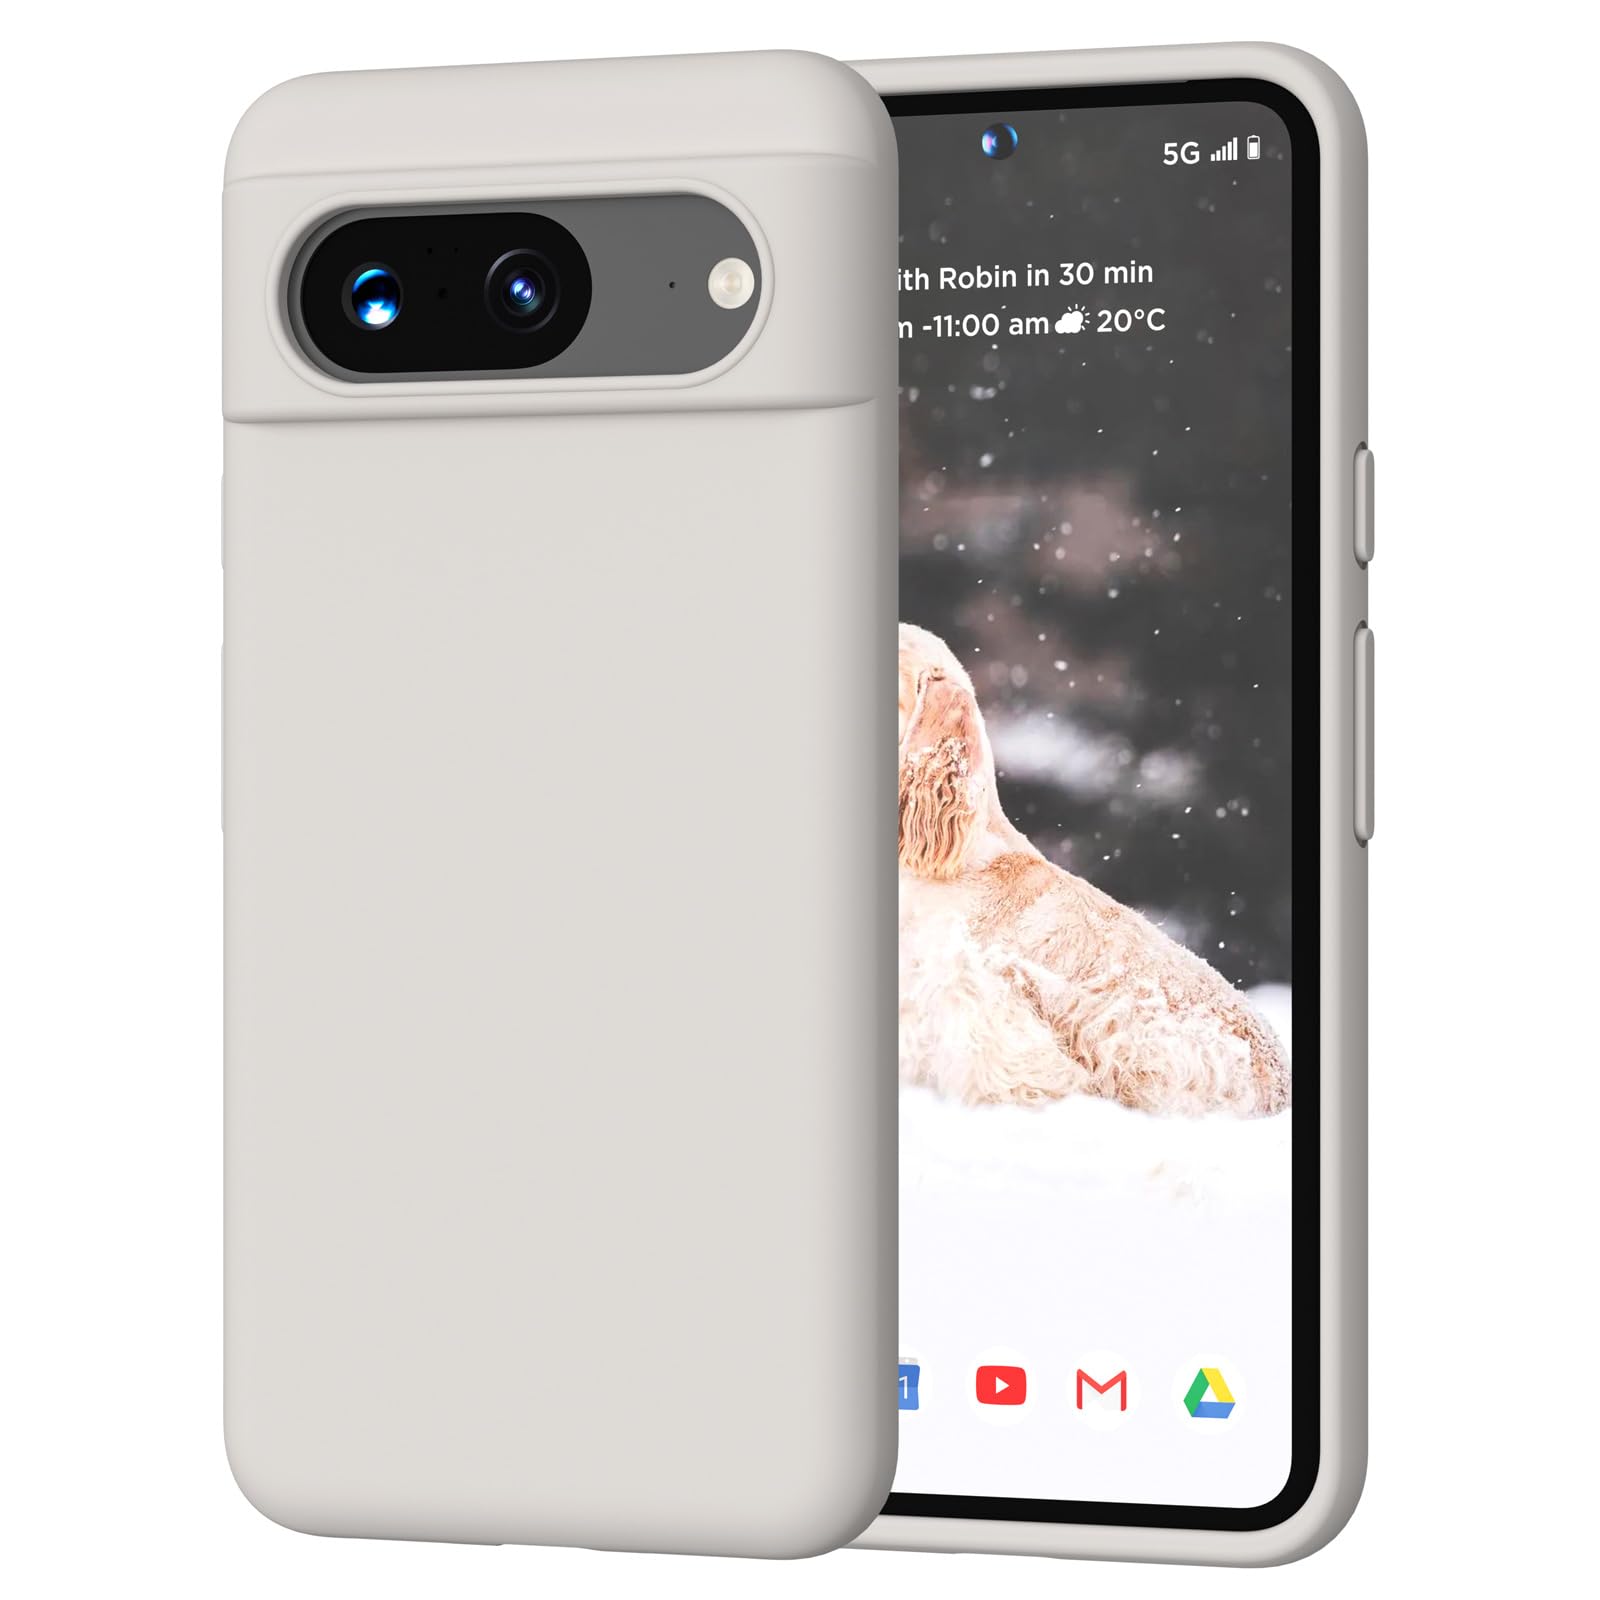 COFFKER Compatible with Pixel 8 Case, Liquid Silicone Case, Full Body Shockproof Protective Cover,【Soft Microfiber Lining】 Slim Thin Phone Case for Google Pixel 8 6.2 inch, Stone